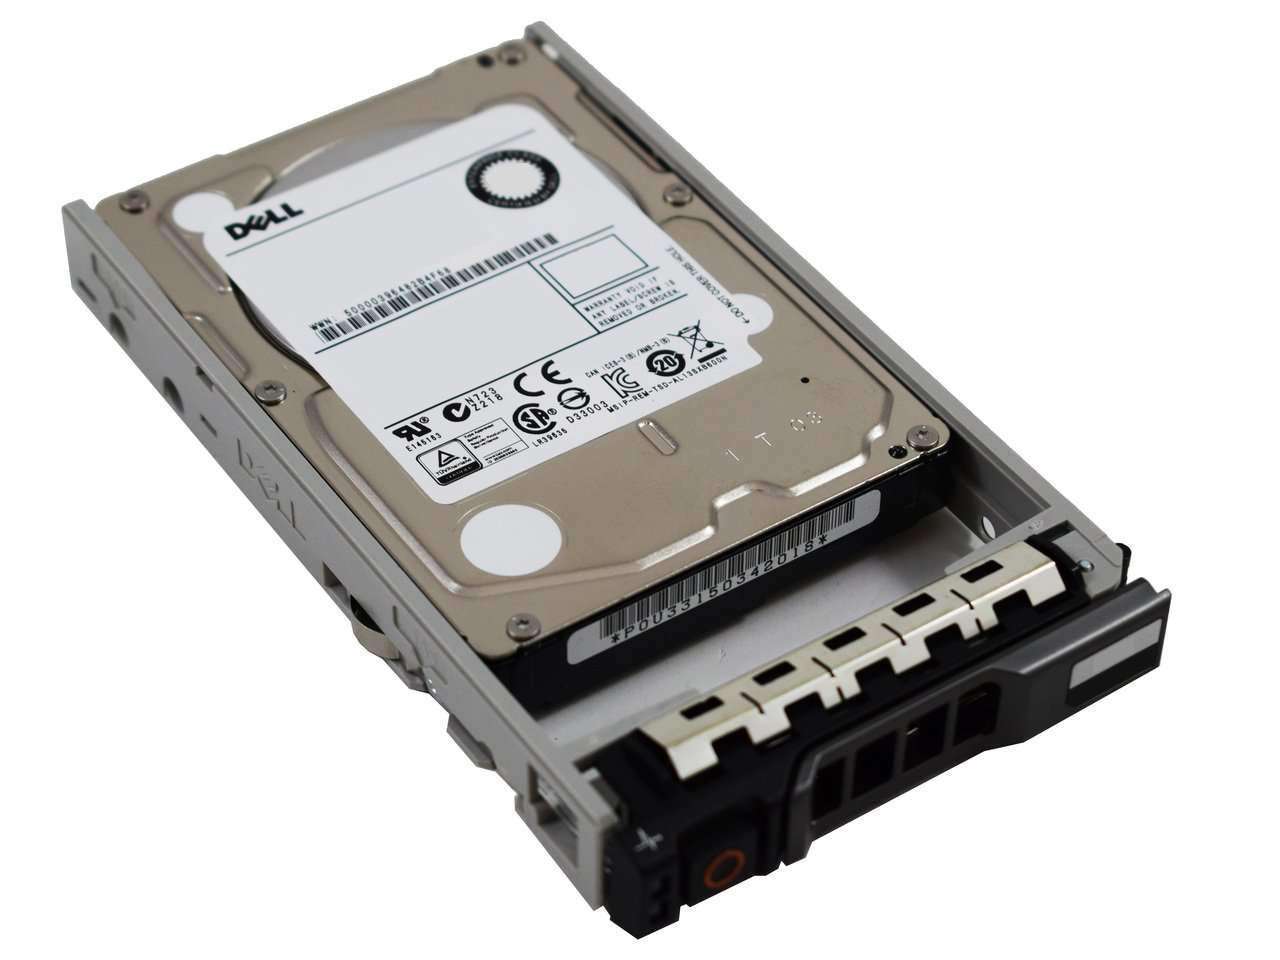 Dell G13 1M69V 900GB 15K RPM SAS 12Gb/s 512e 2.5" Manufacturer Recertified HDD